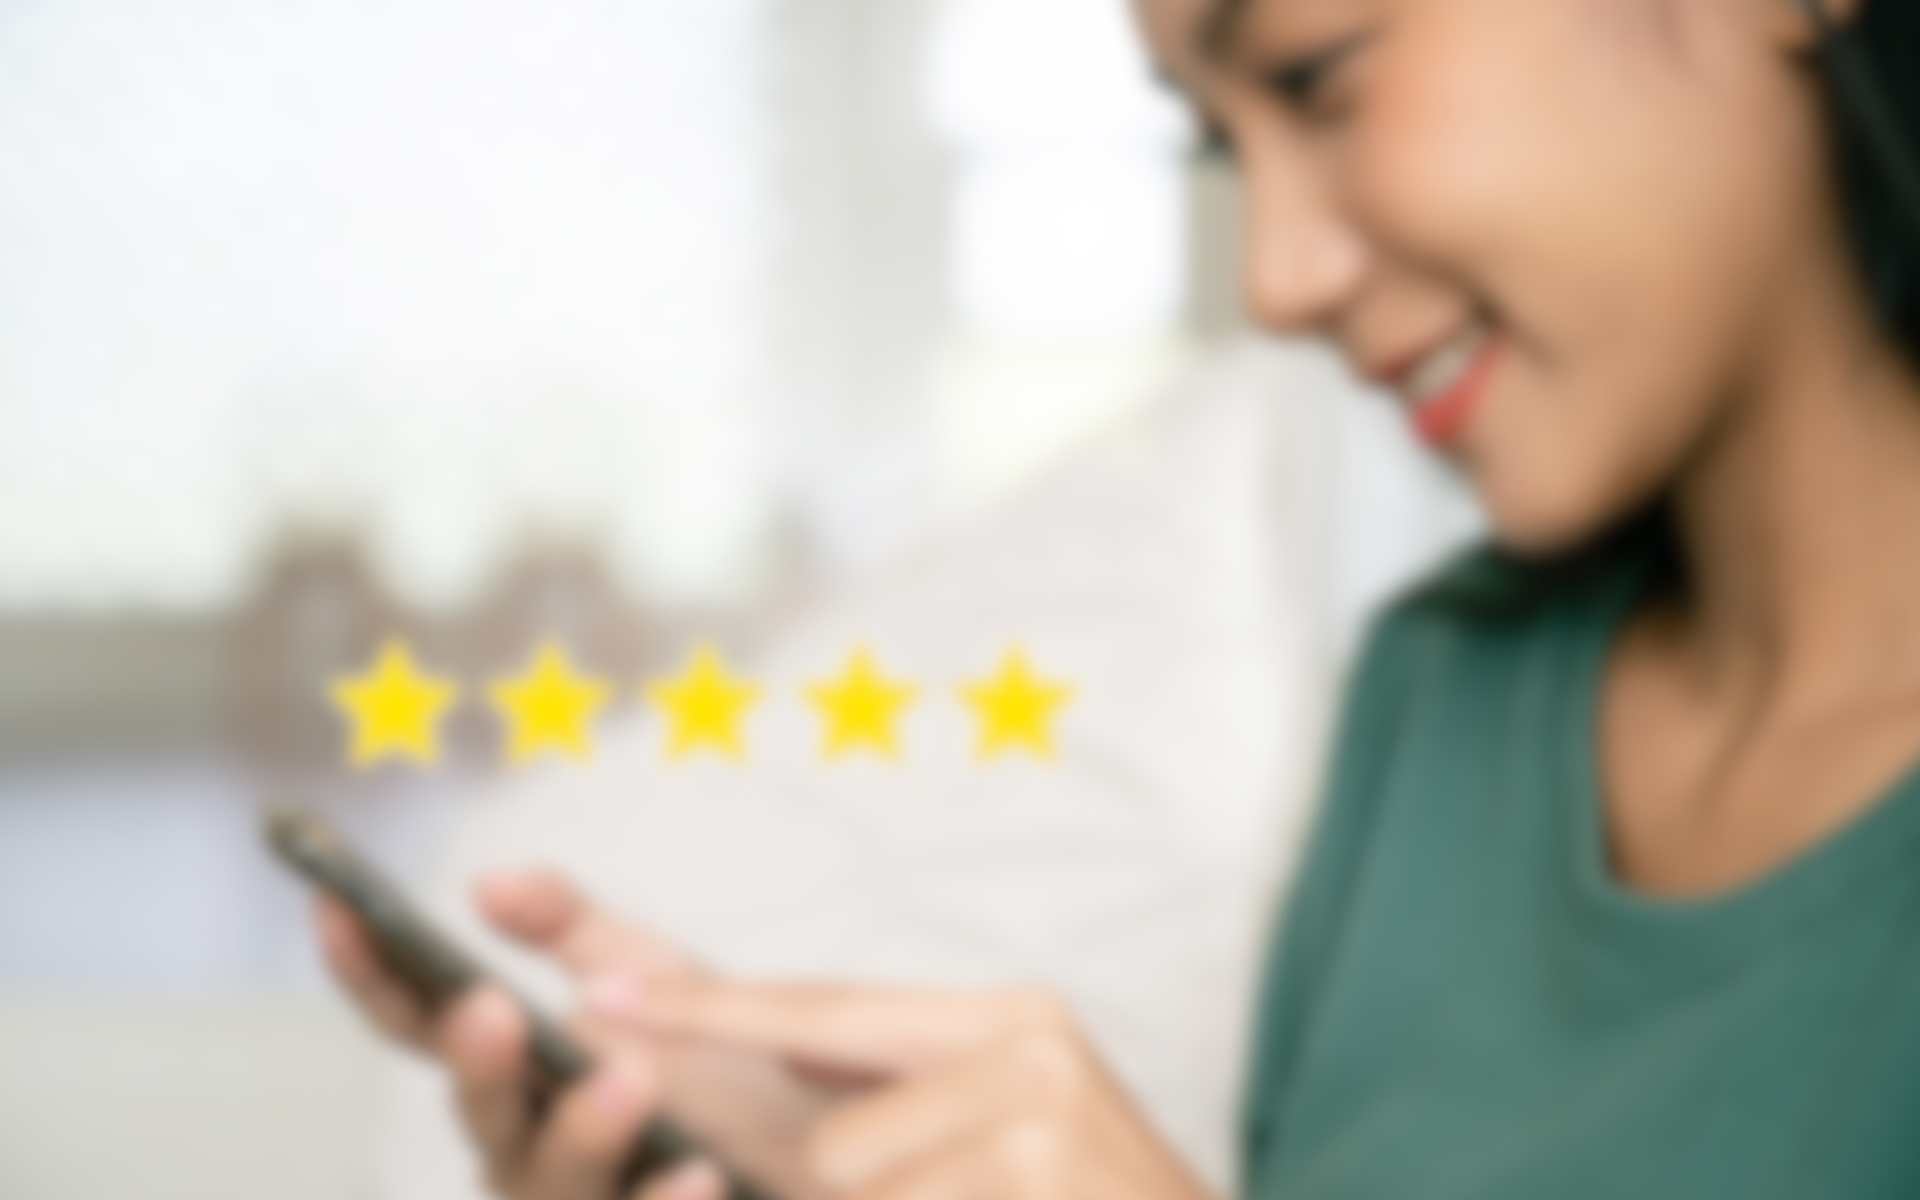 Customers enjoying improved service experiences, reflecting deeper trust and loyalty.